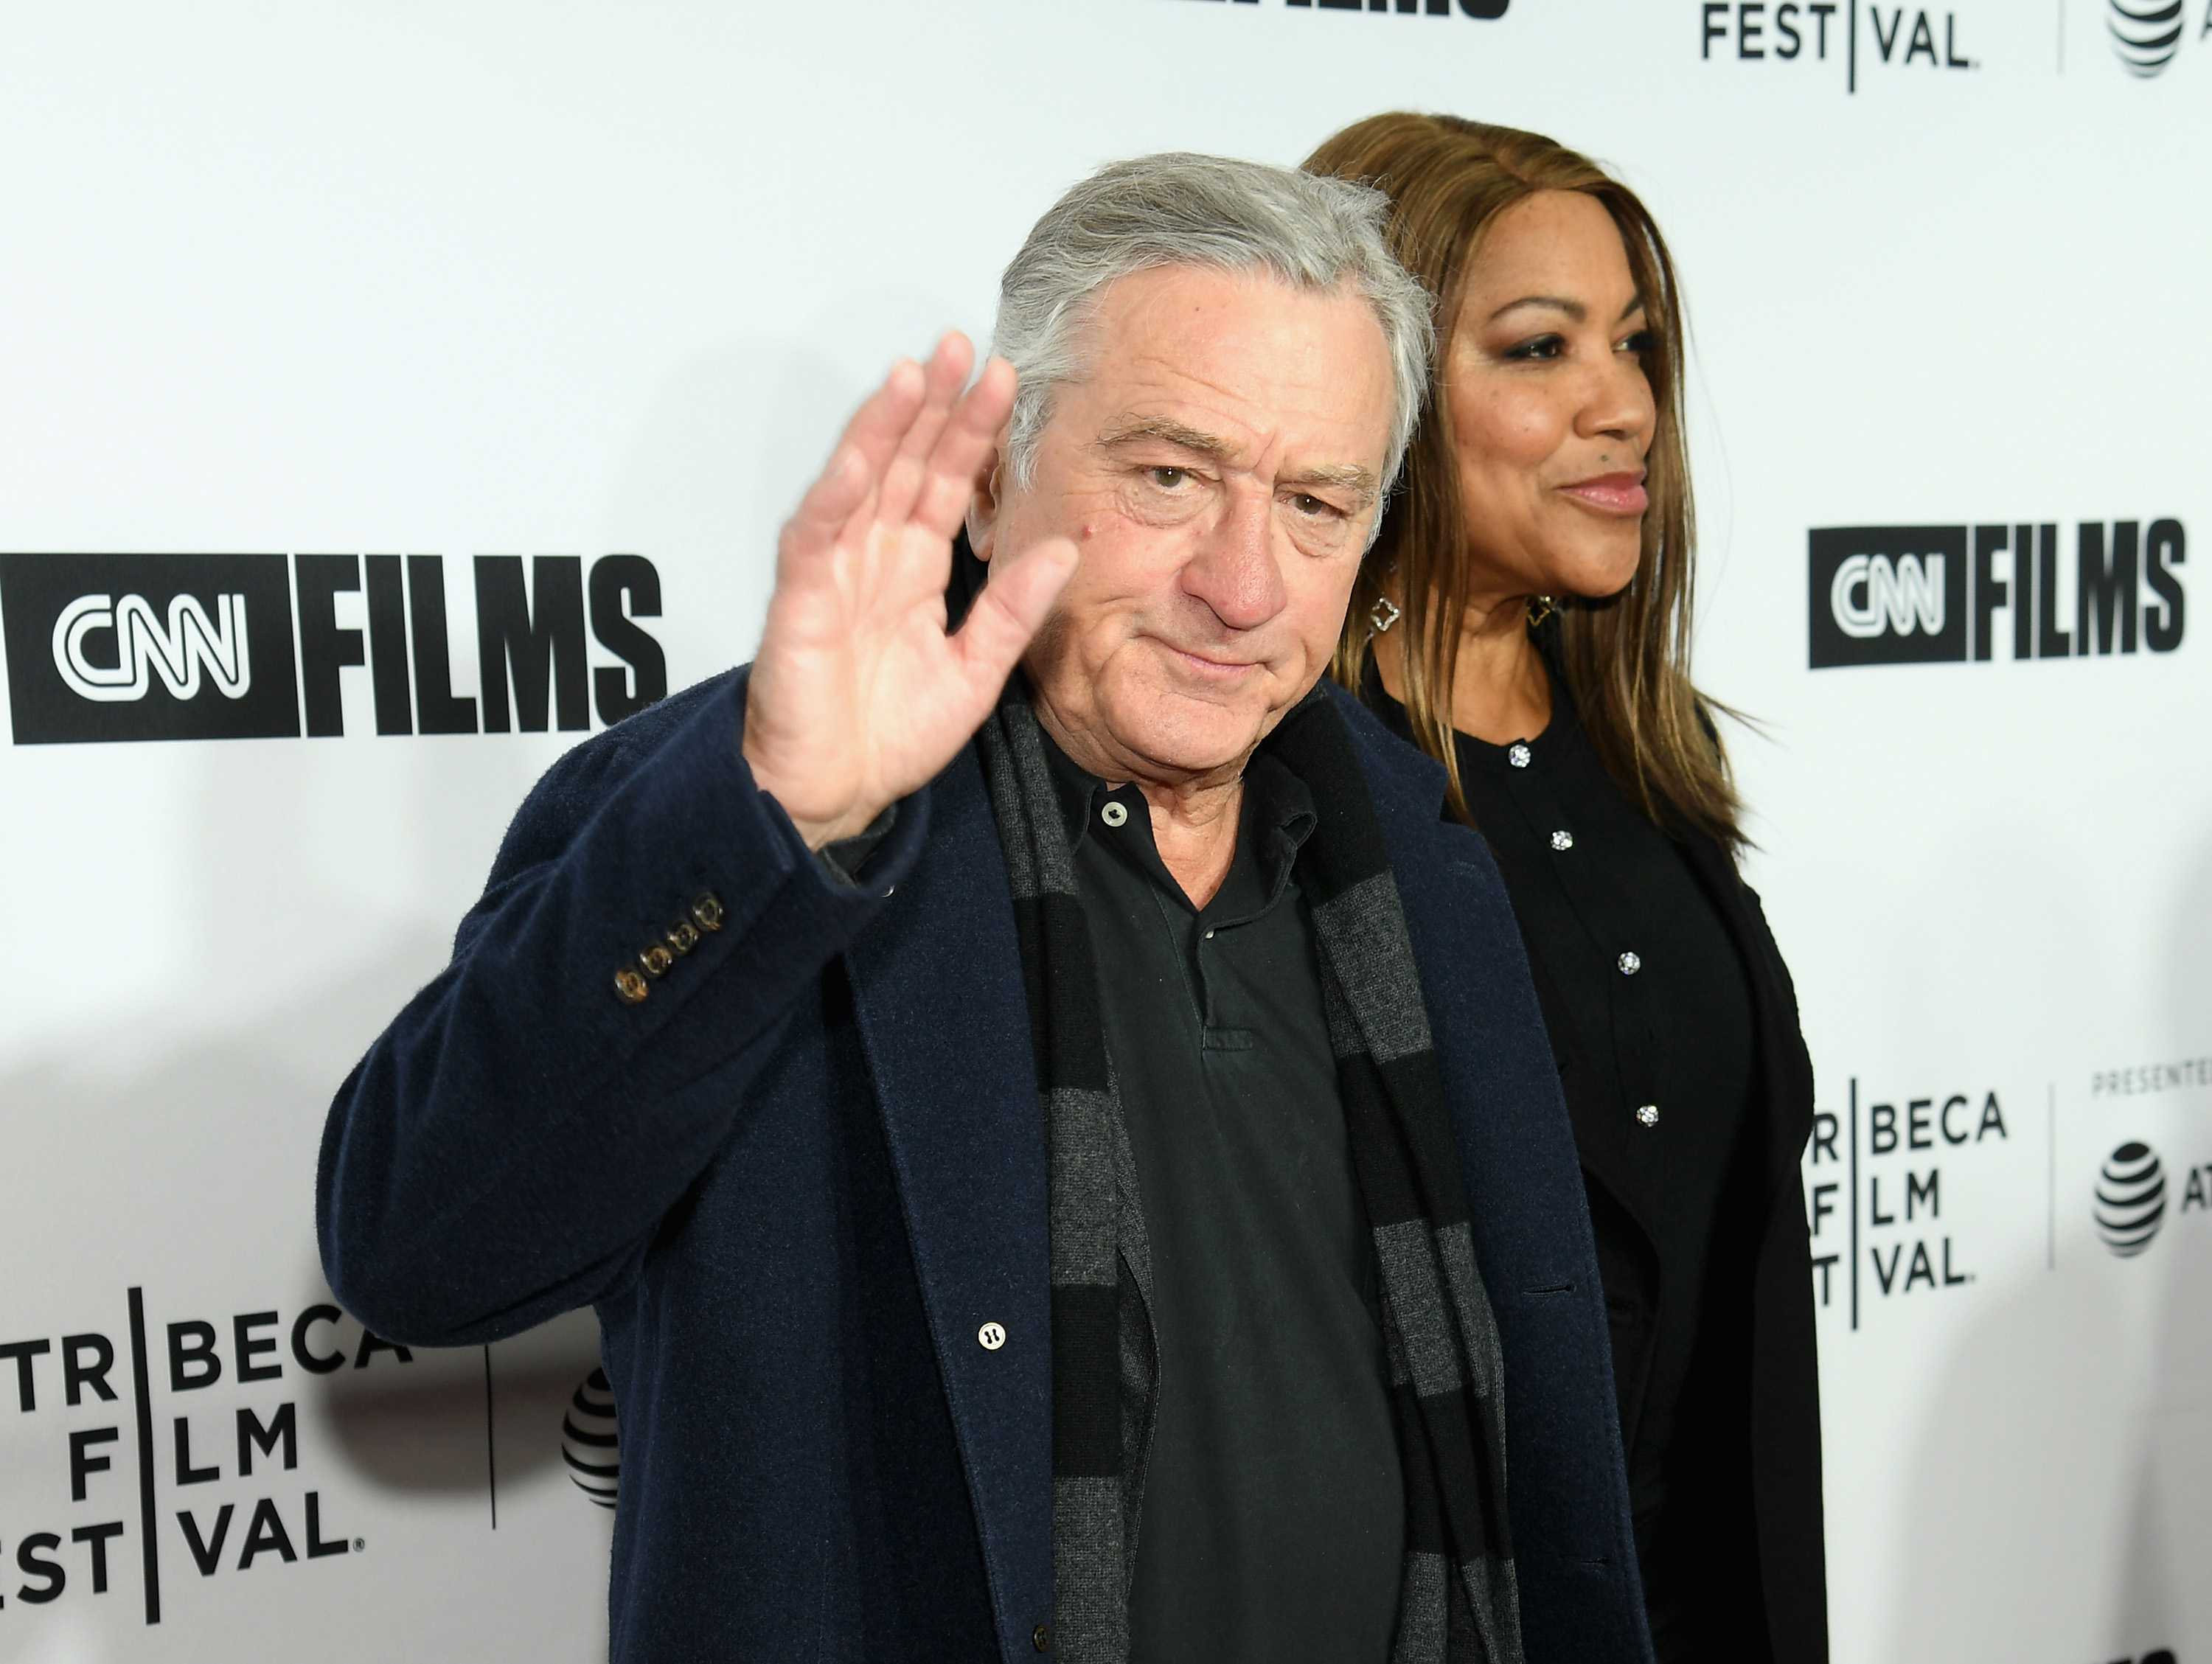 Robert De Niro and Grace Hightower at the Opening Night Gala of "Love, Gilda" - 2018 Tribeca Film Festival at Beacon Theatre on April 18, 2018 in New York City | Source: Getty Images